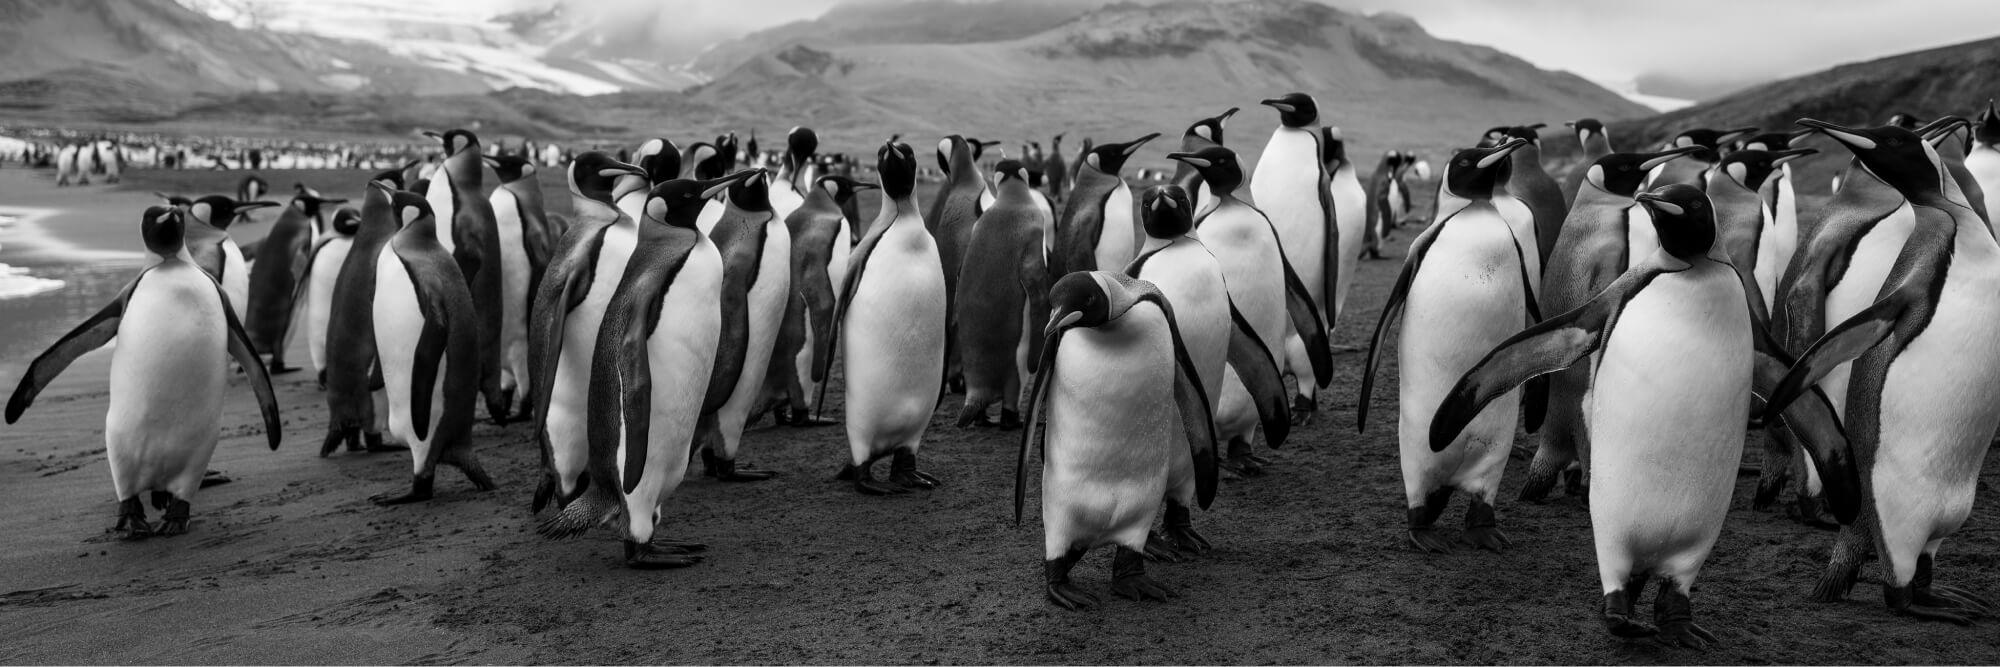 King penguins seem to know they’re the rulers of the ice. Photographer: Artem Shestakov. Location: Antarctica.